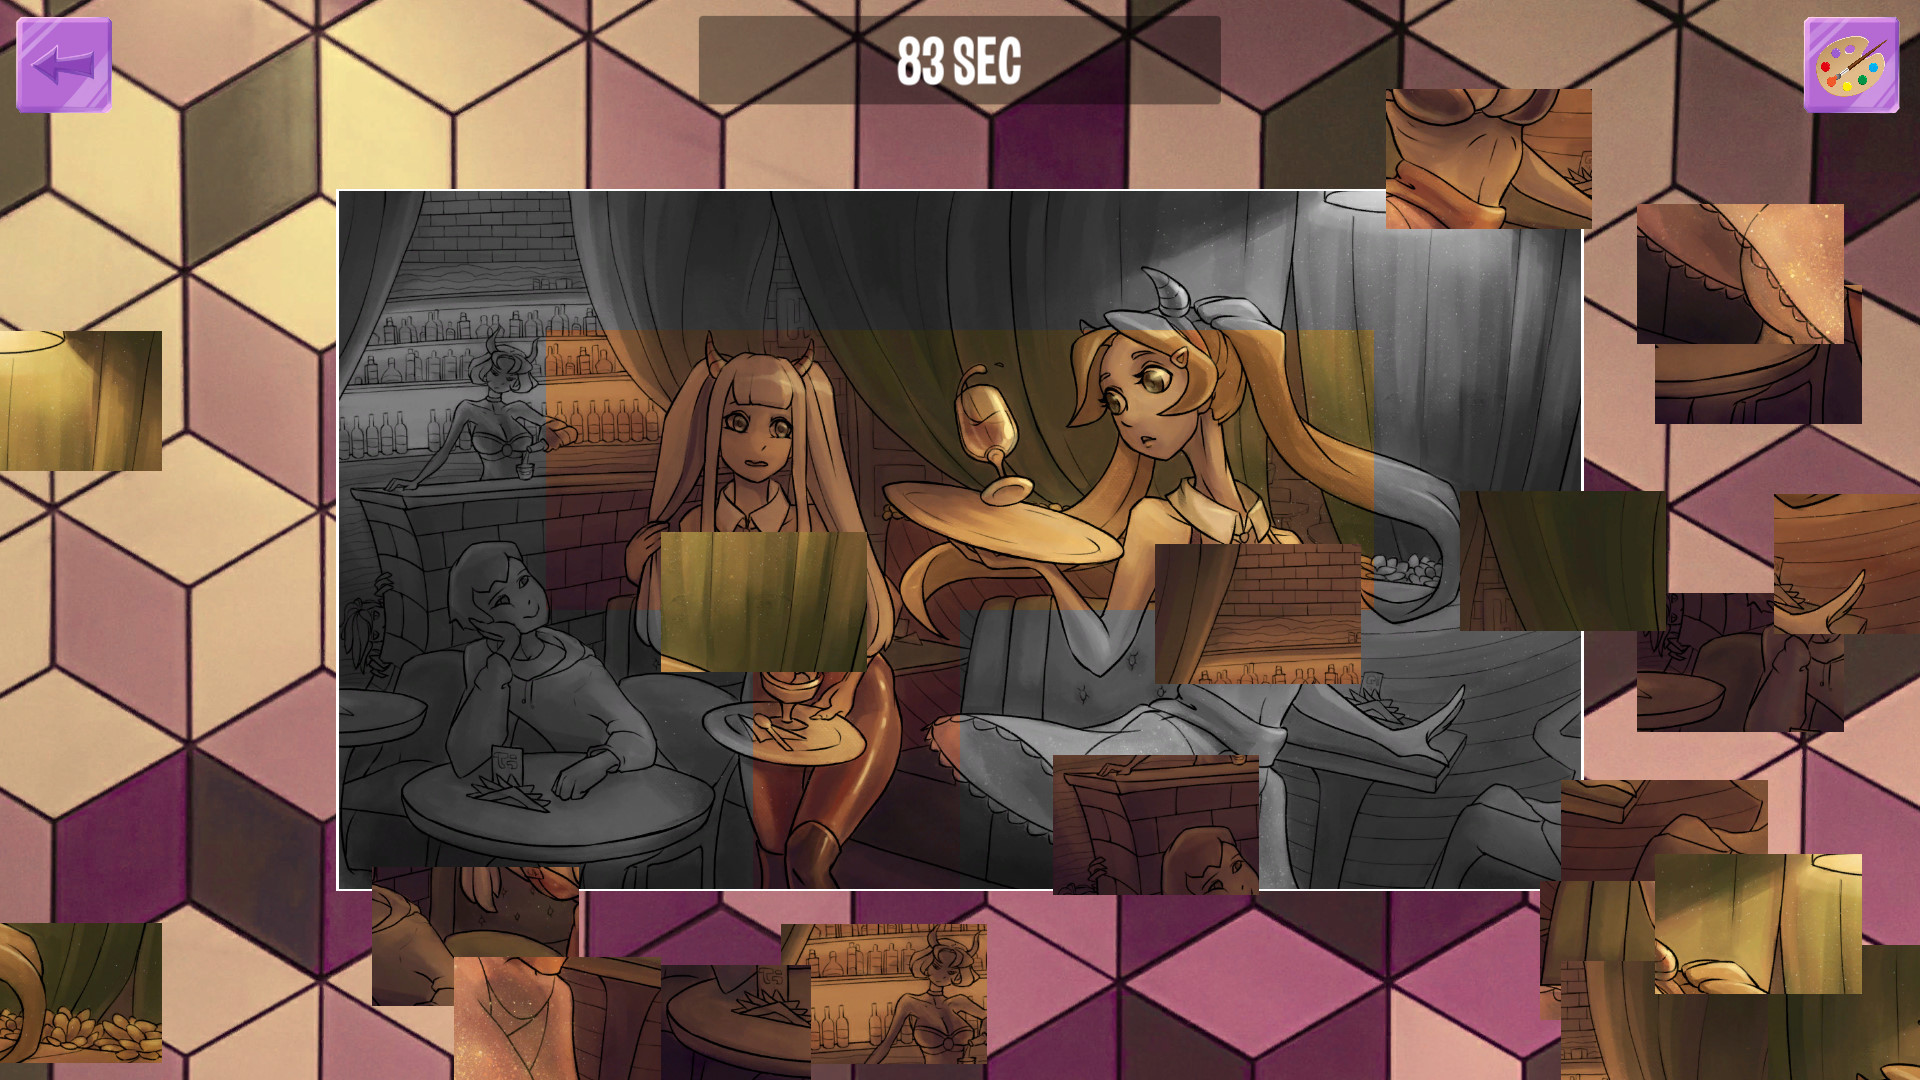 Girls On Puzzle Steam CD Key